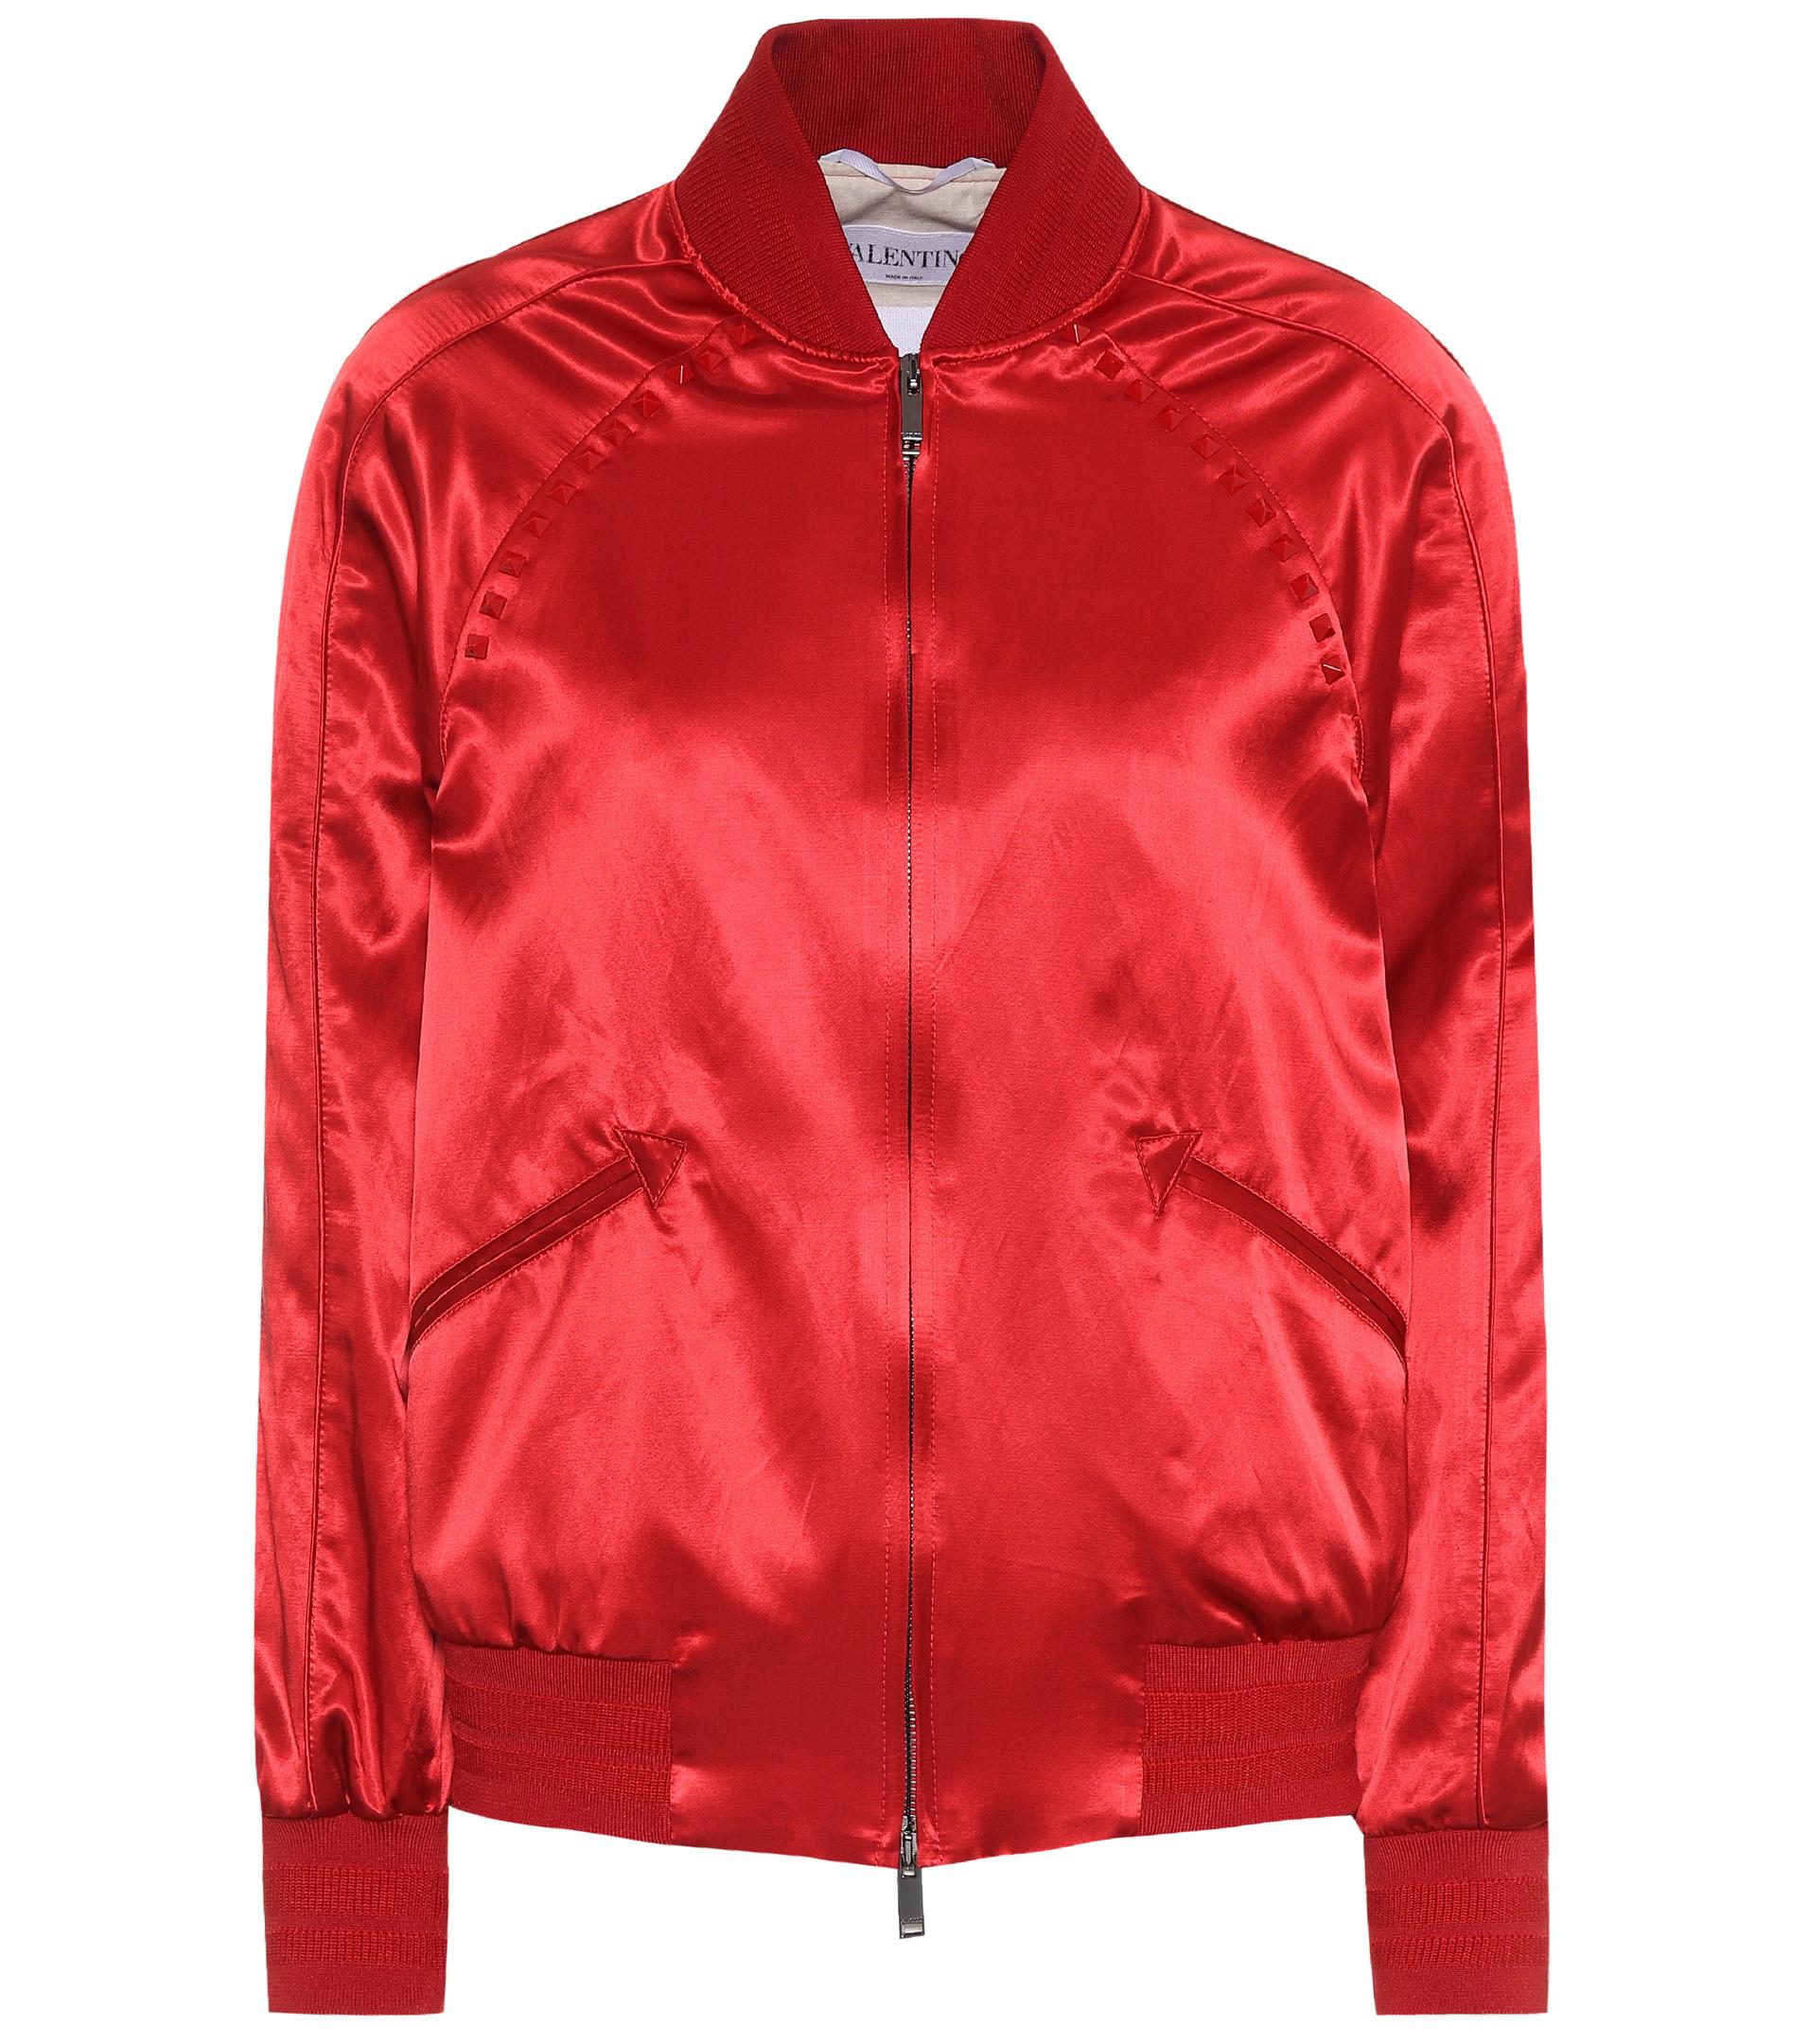 Valentino Satin Bomber Jacket in Red - Lyst